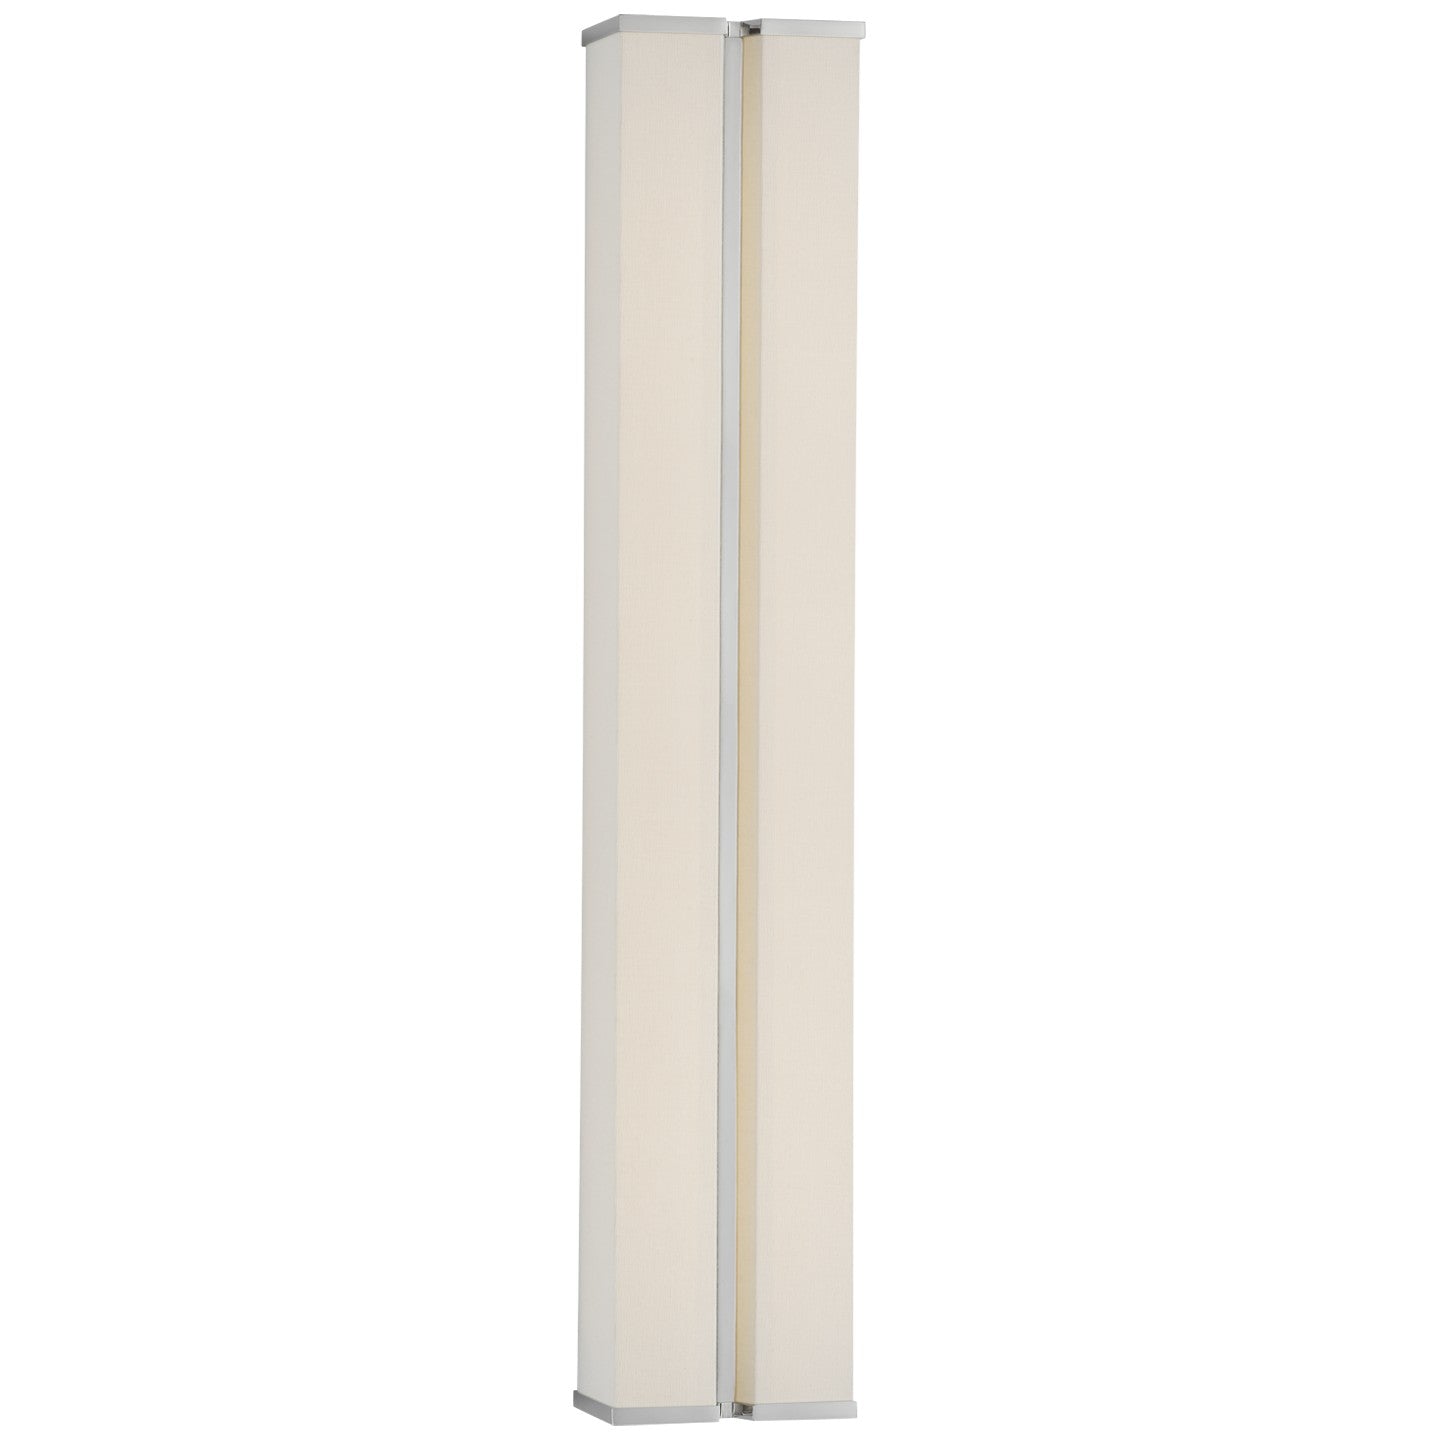 Visual Comfort Signature - PCD 2252PN/L - LED Wall Sconce - Vernet - Polished Nickel and Linen